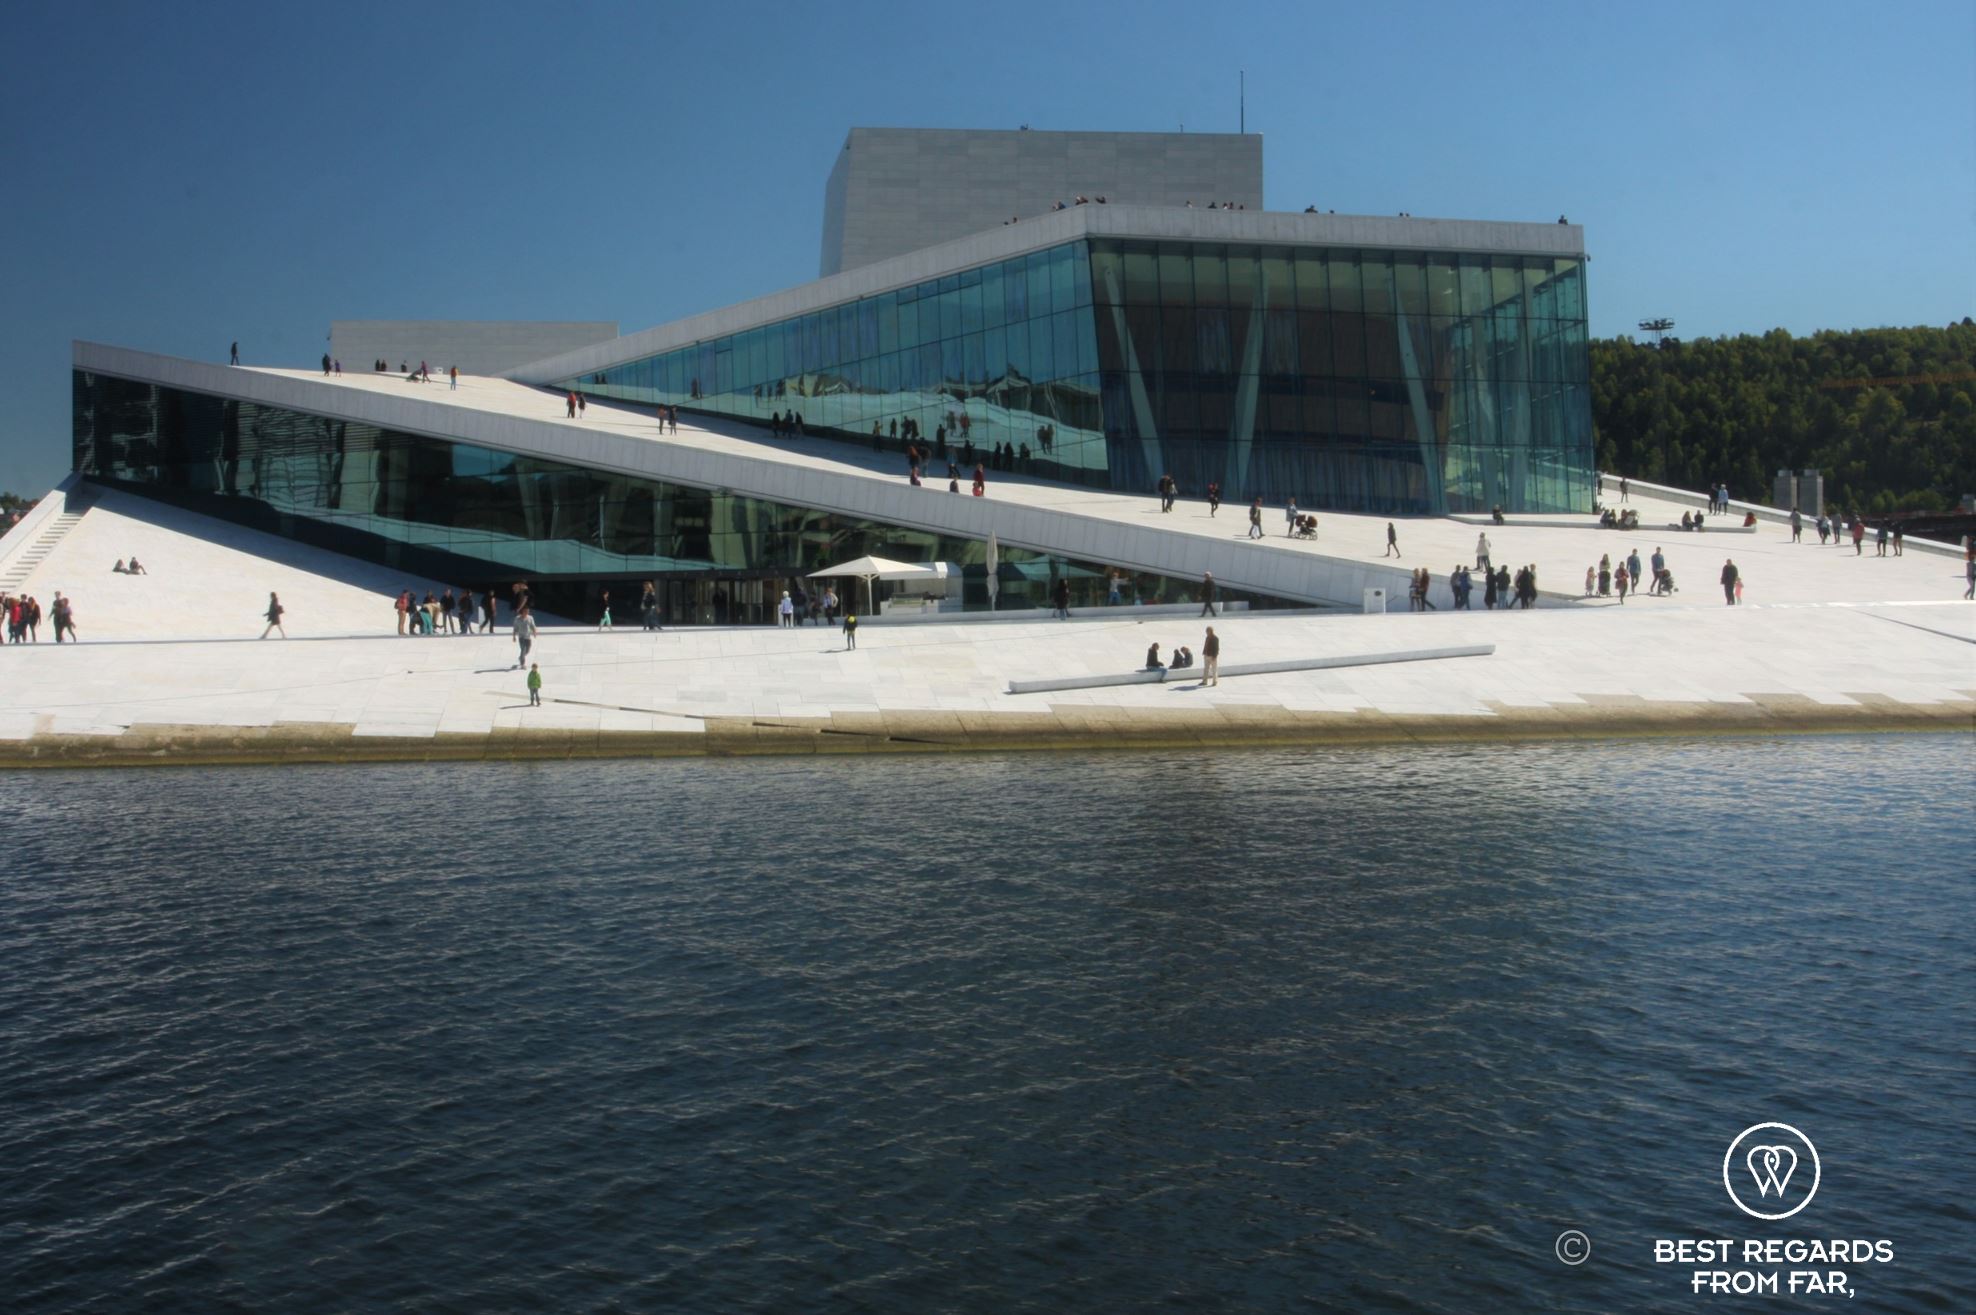 Modern building of the Oslo Opera House, white marble rising out of the water with people walking on its roof.